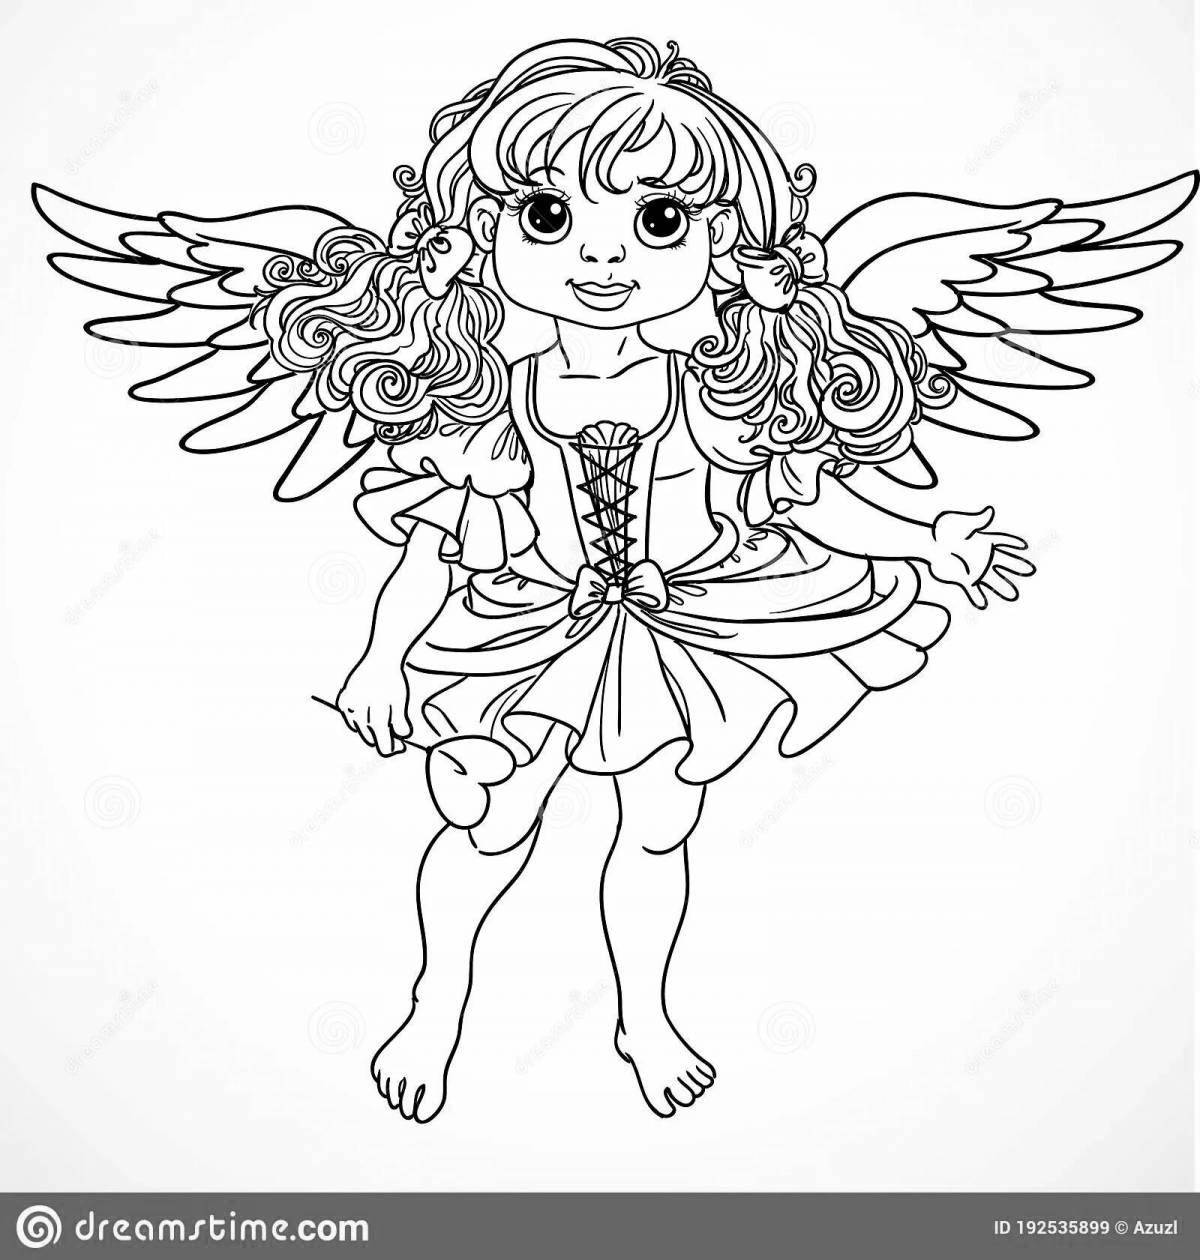 Luminous coloring girl with wings